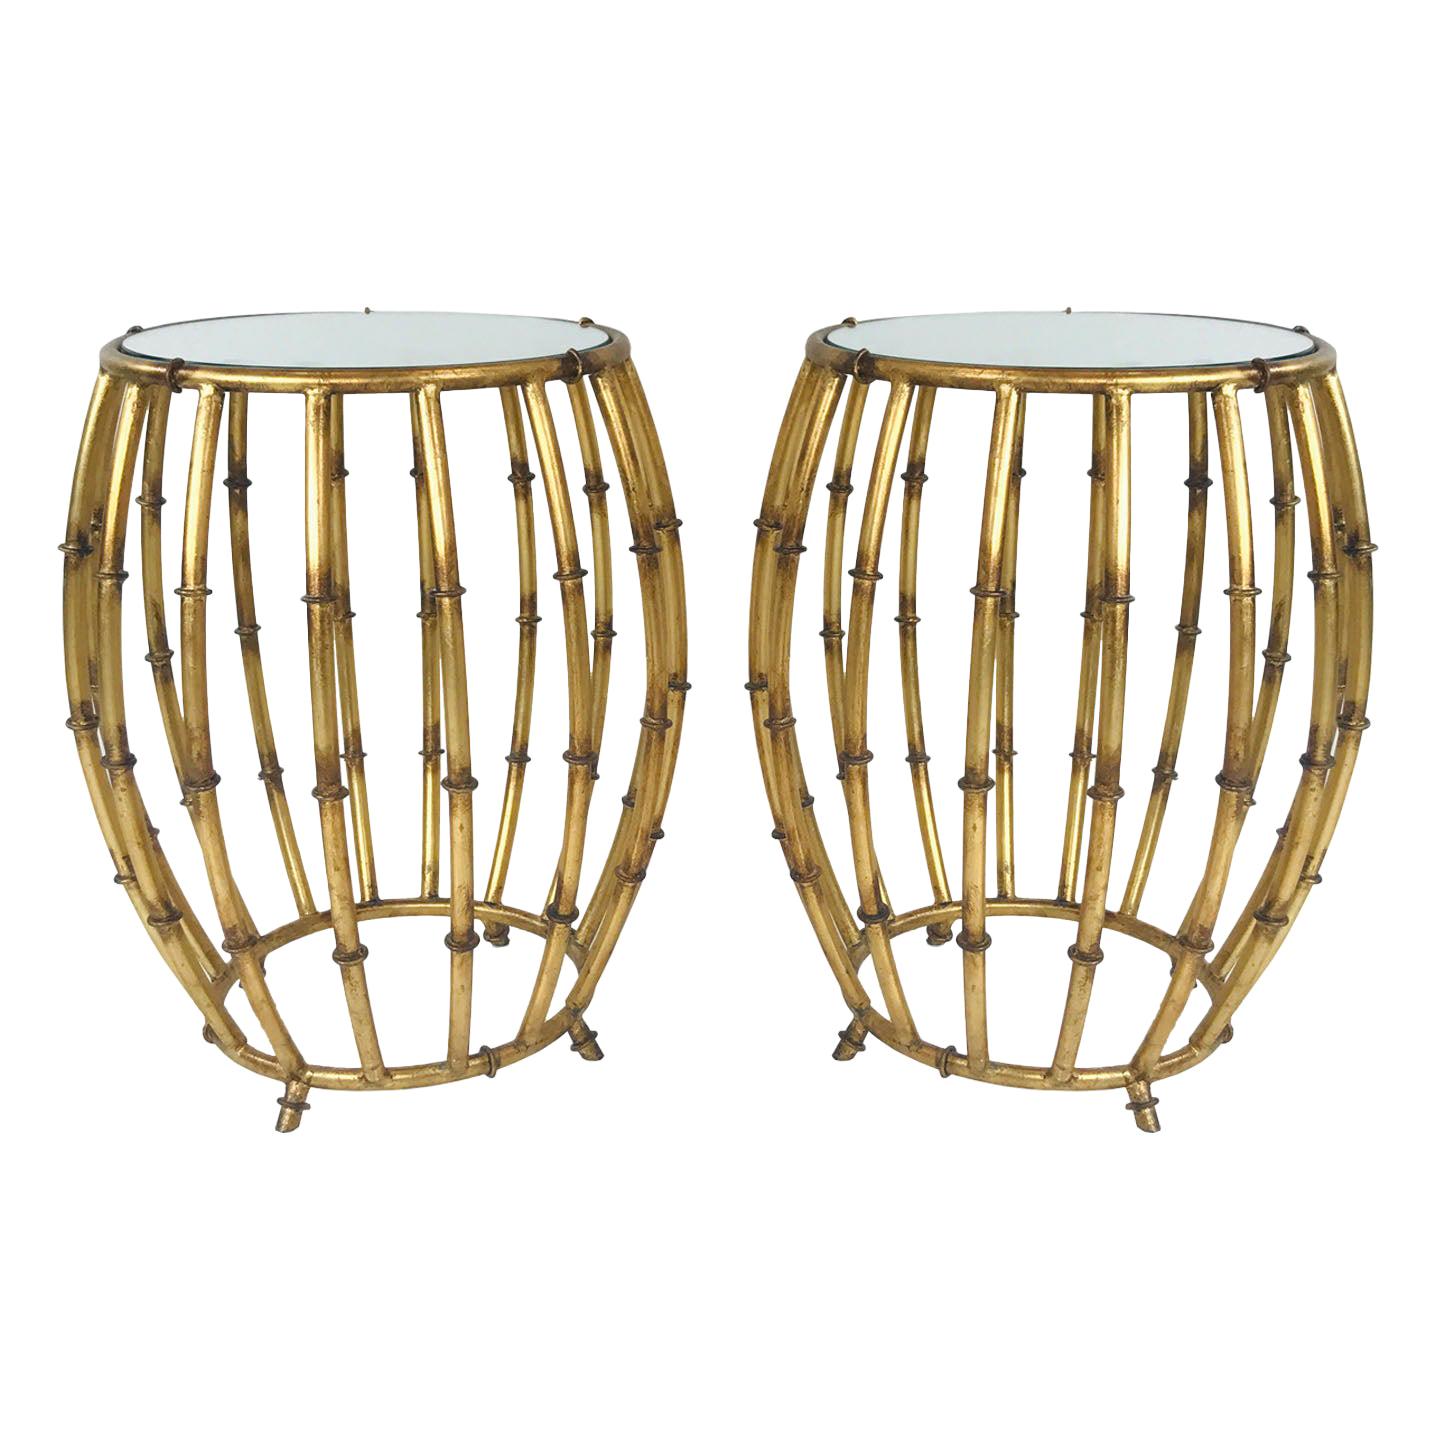 Pair of Gold Faux Bamboo Drum Side Tables with Mirrored Tops